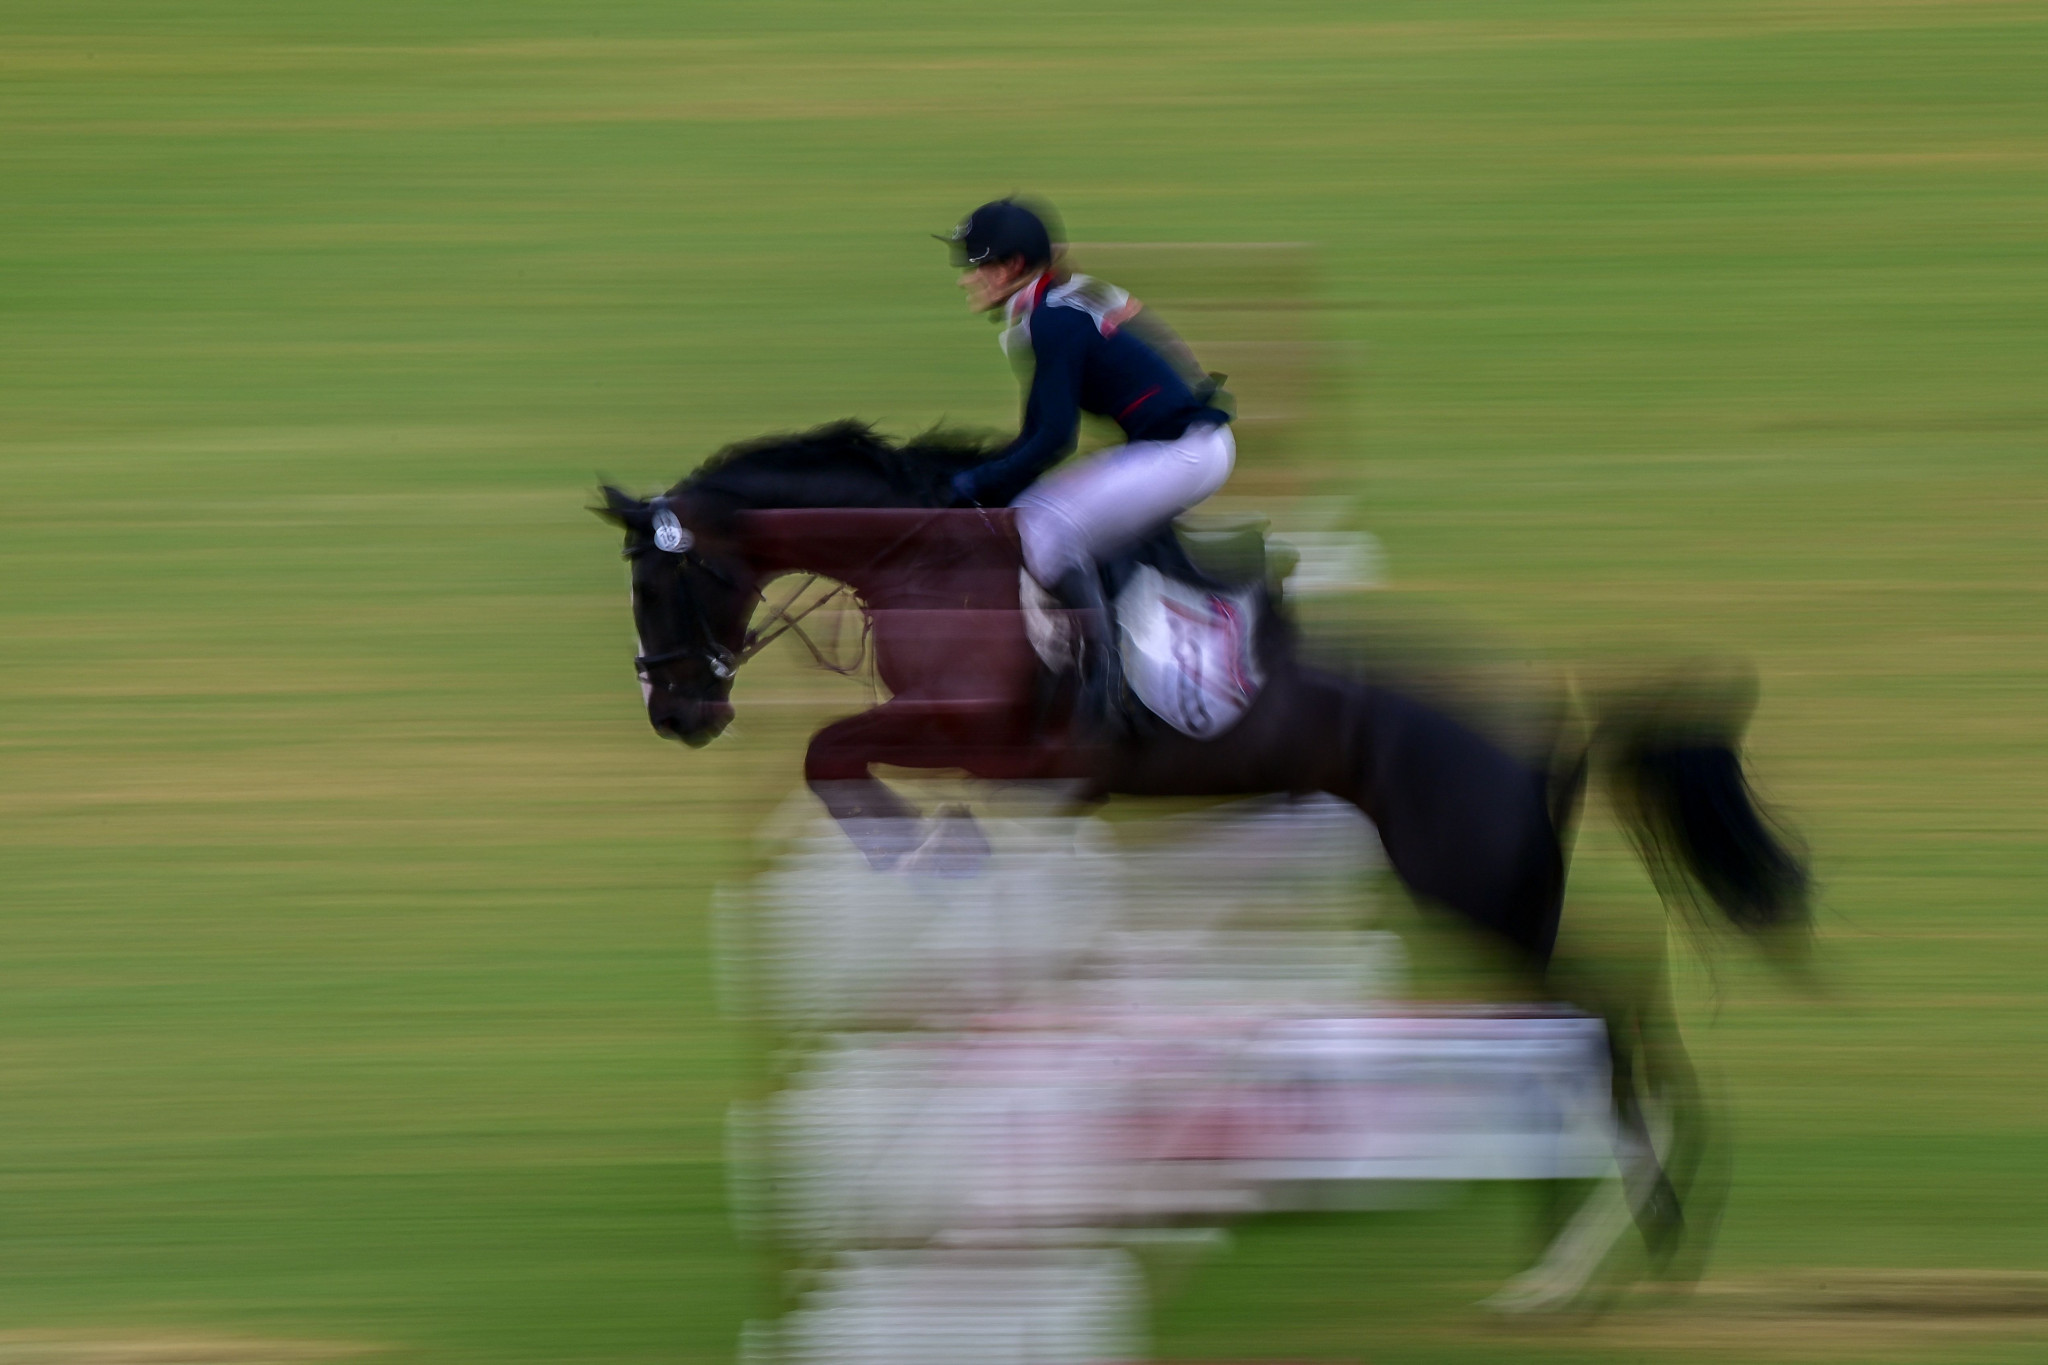 Six modern pentathlon nations have called for Russian administrators to be banned ©Getty Images